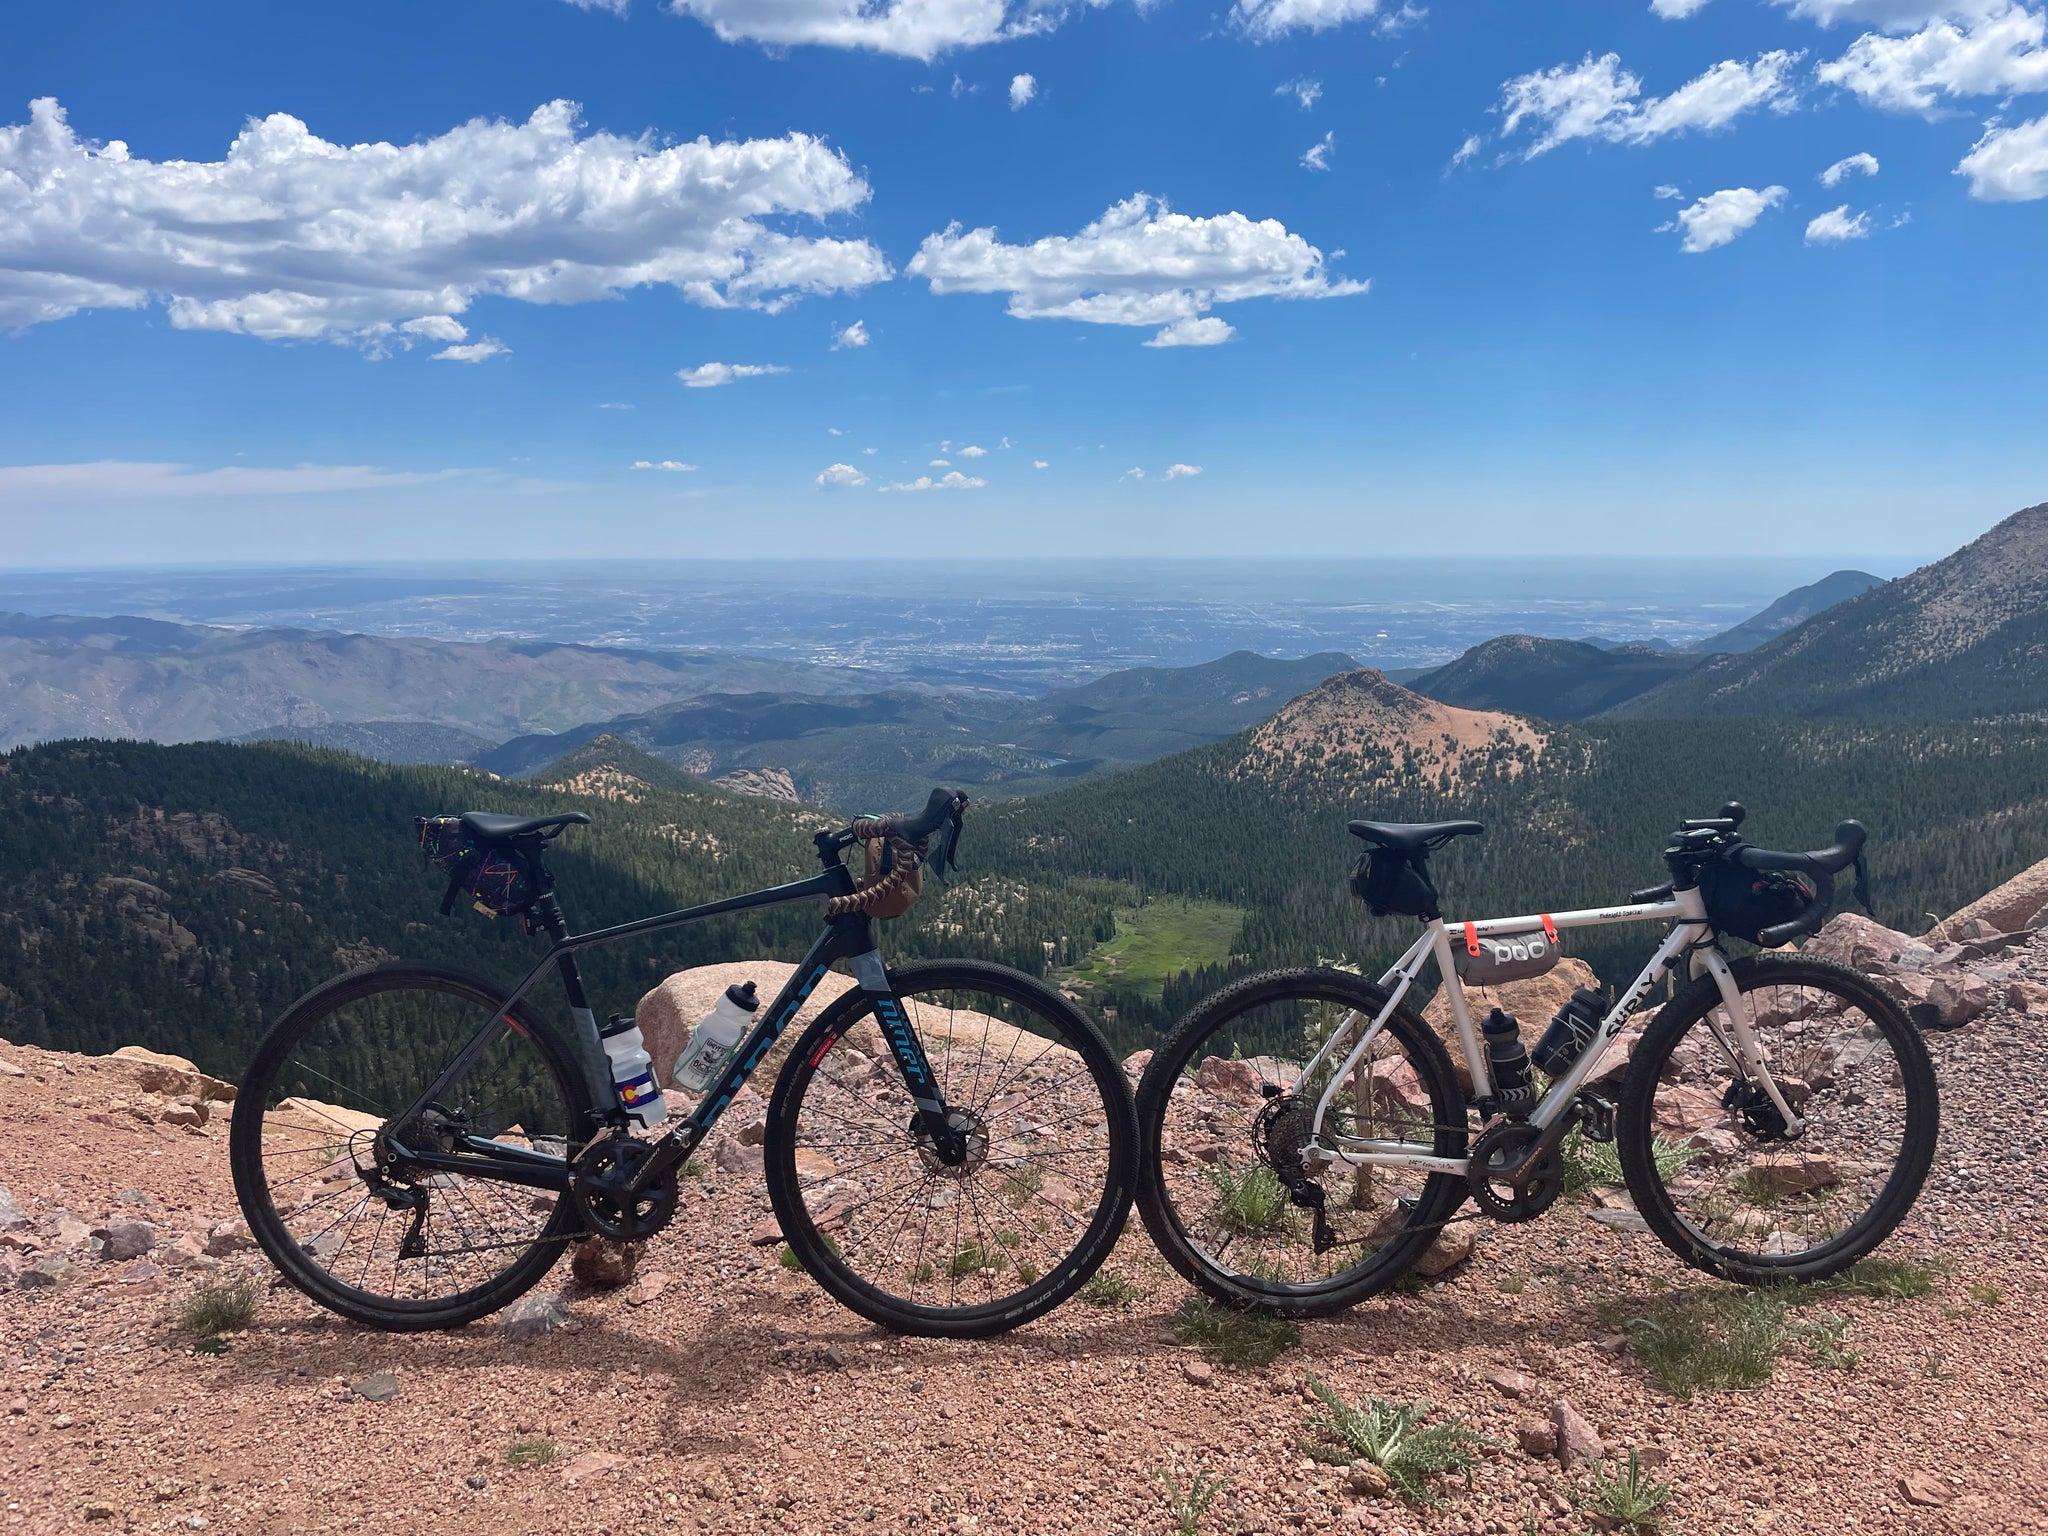 Cycling to the top of Pikes Peak